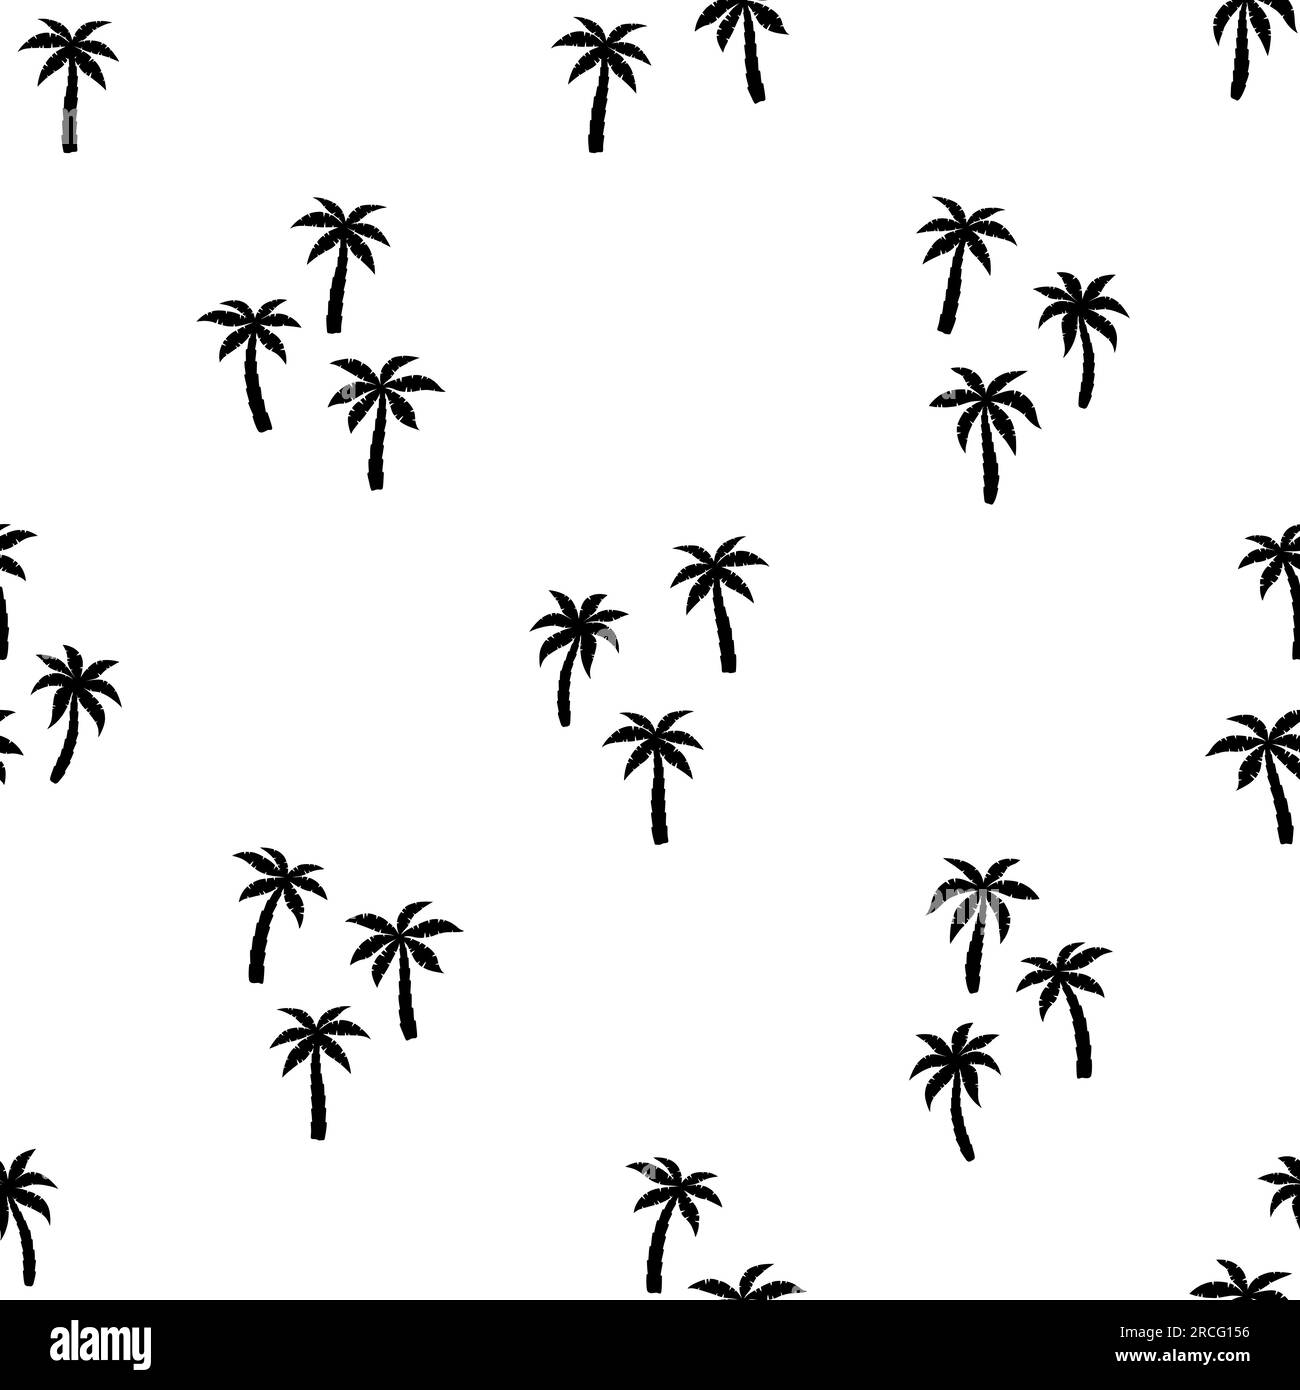 Palm tree seamless pattern. Repeating cute palms background for prints ...